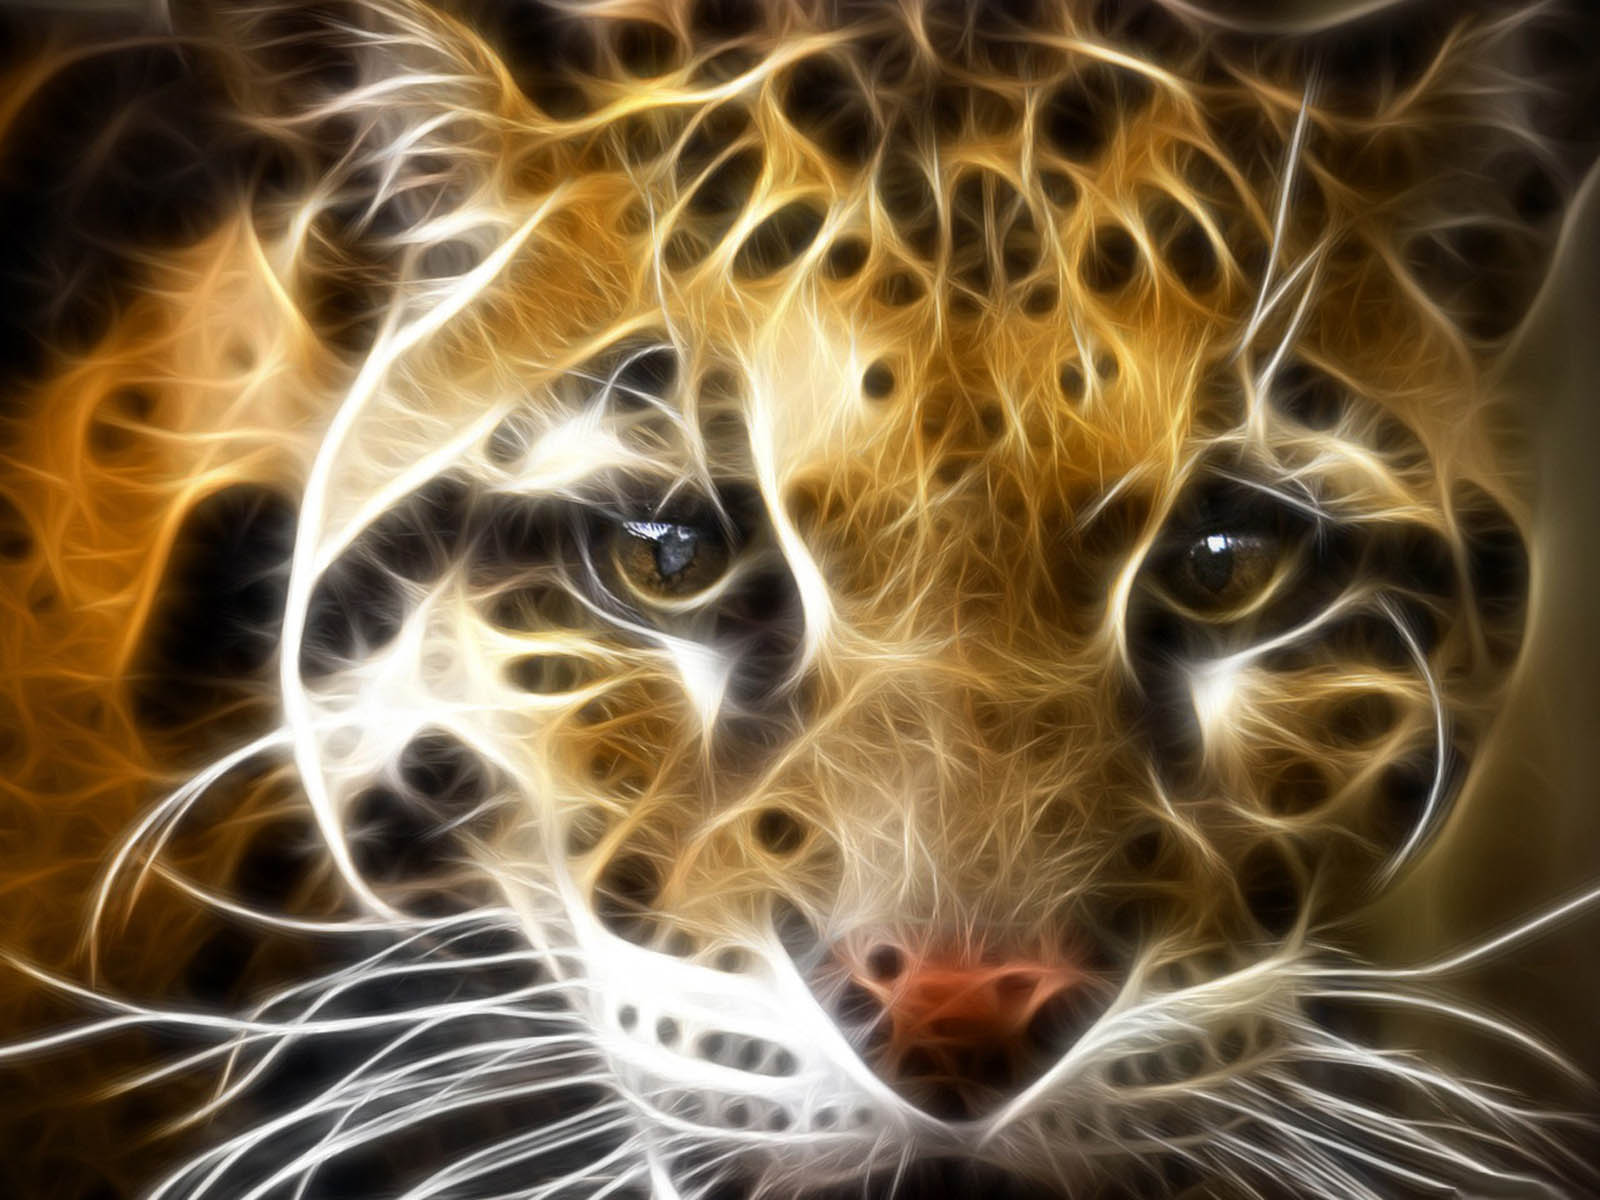 Tag Tiger 3D Wallpapers Images Photos Pictures and Backgrounds for 1600x1200